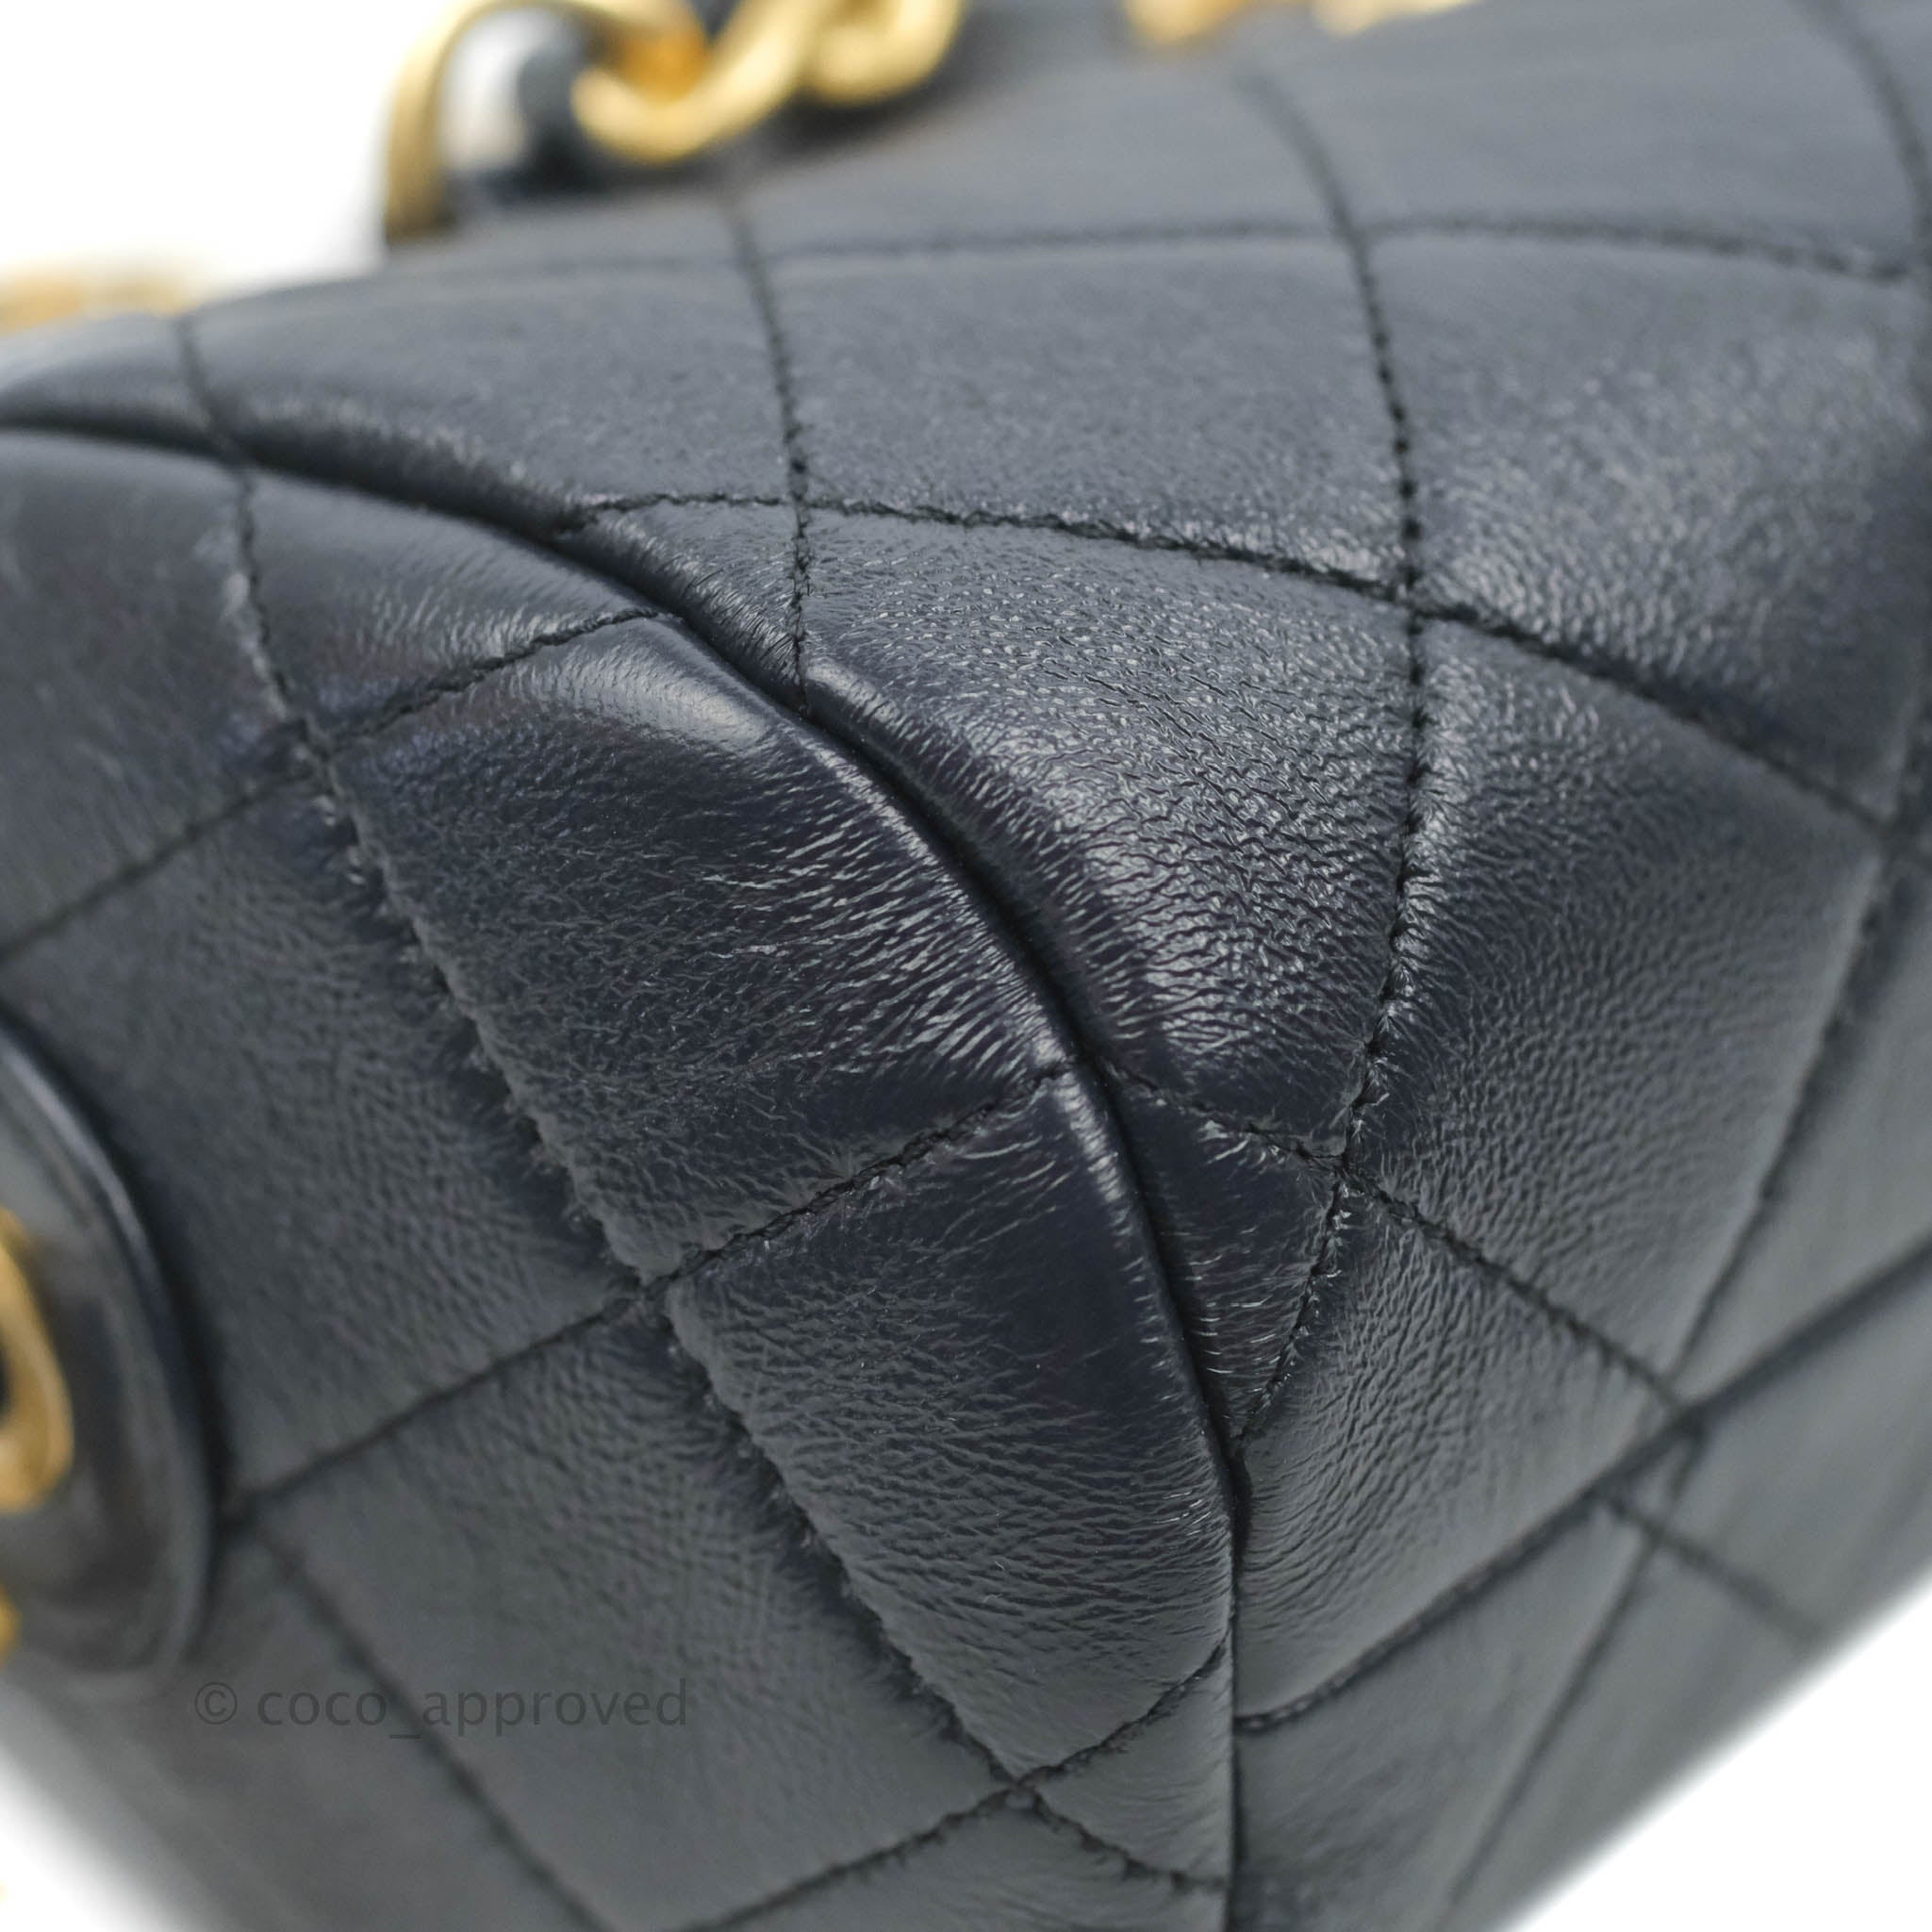 chanel classic quilted bag